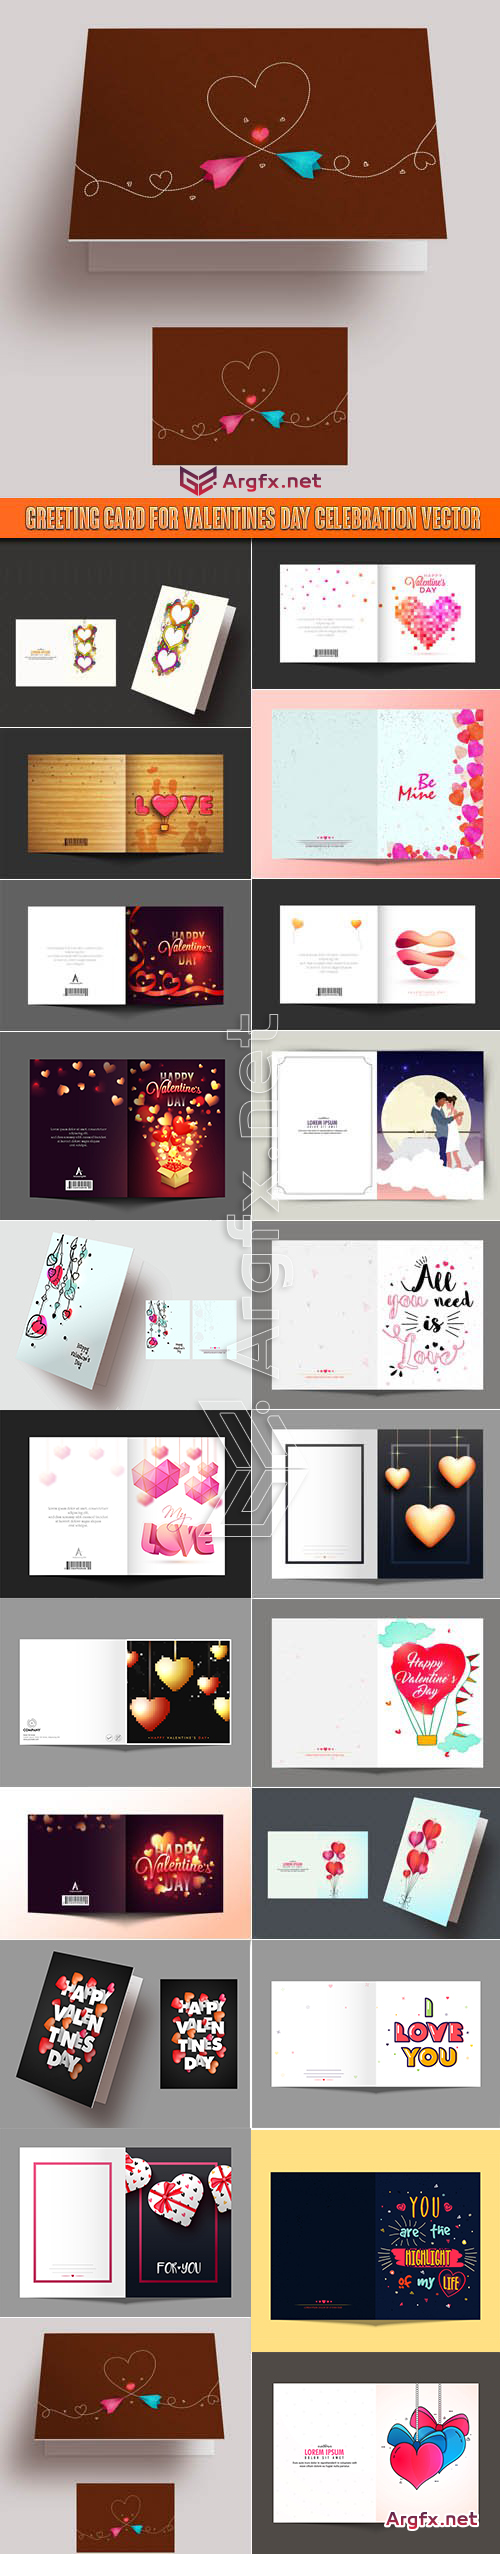 Greeting Card for Valentines Day celebration vector